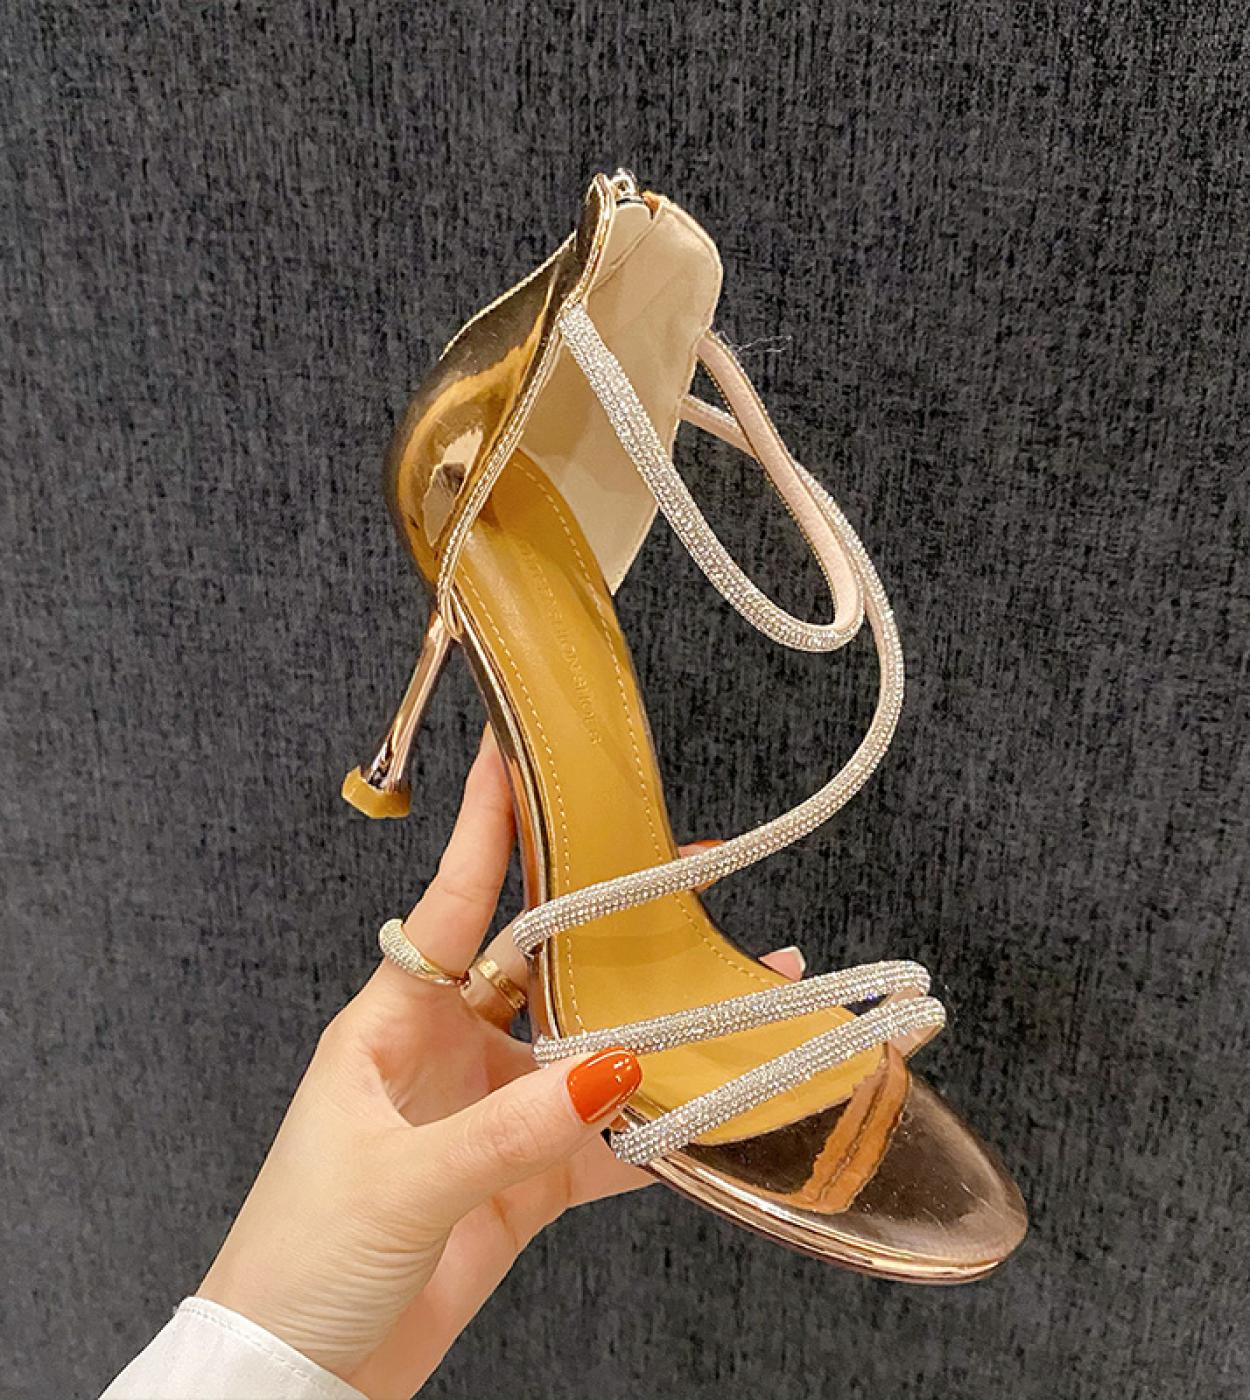 Classic Style With Skirt Sandals Womens Stiletto Heel 2022 New Celebrity Rhinestone Buckle Fairy Style High Heels Goods